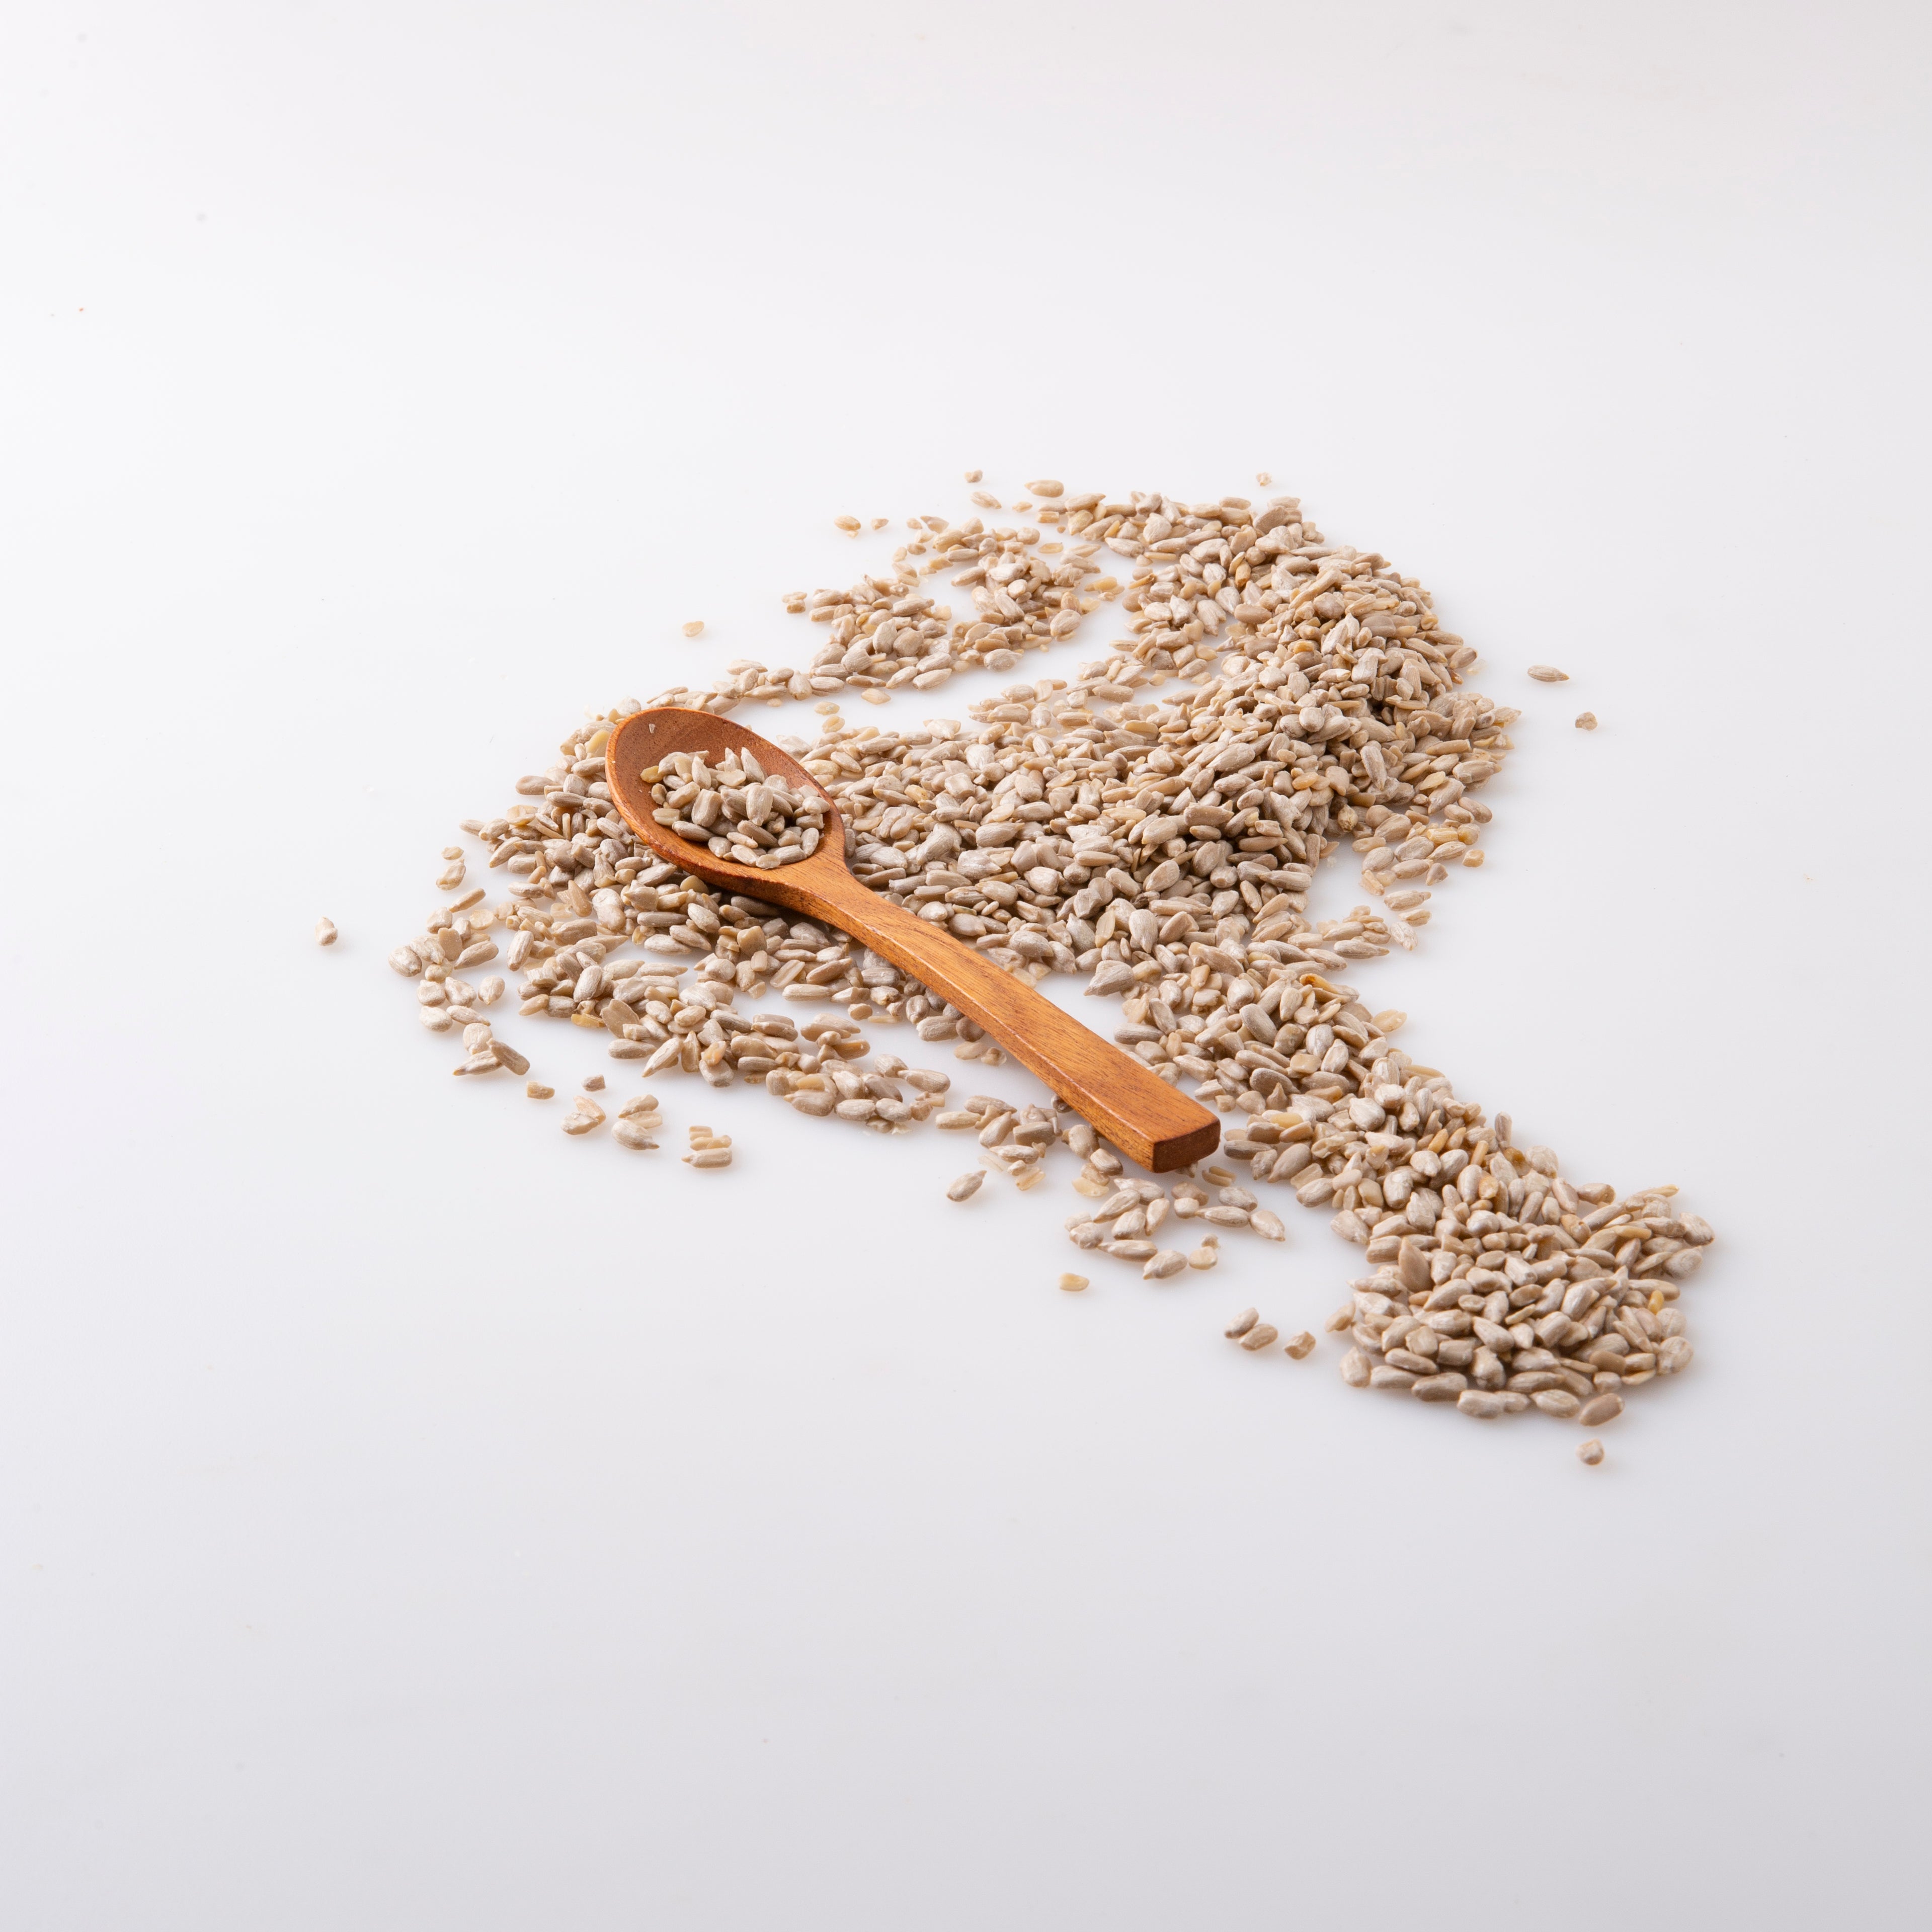 An image of Organic Sunflower Seeds (Seeds) on wooden spoon - Naked Foods